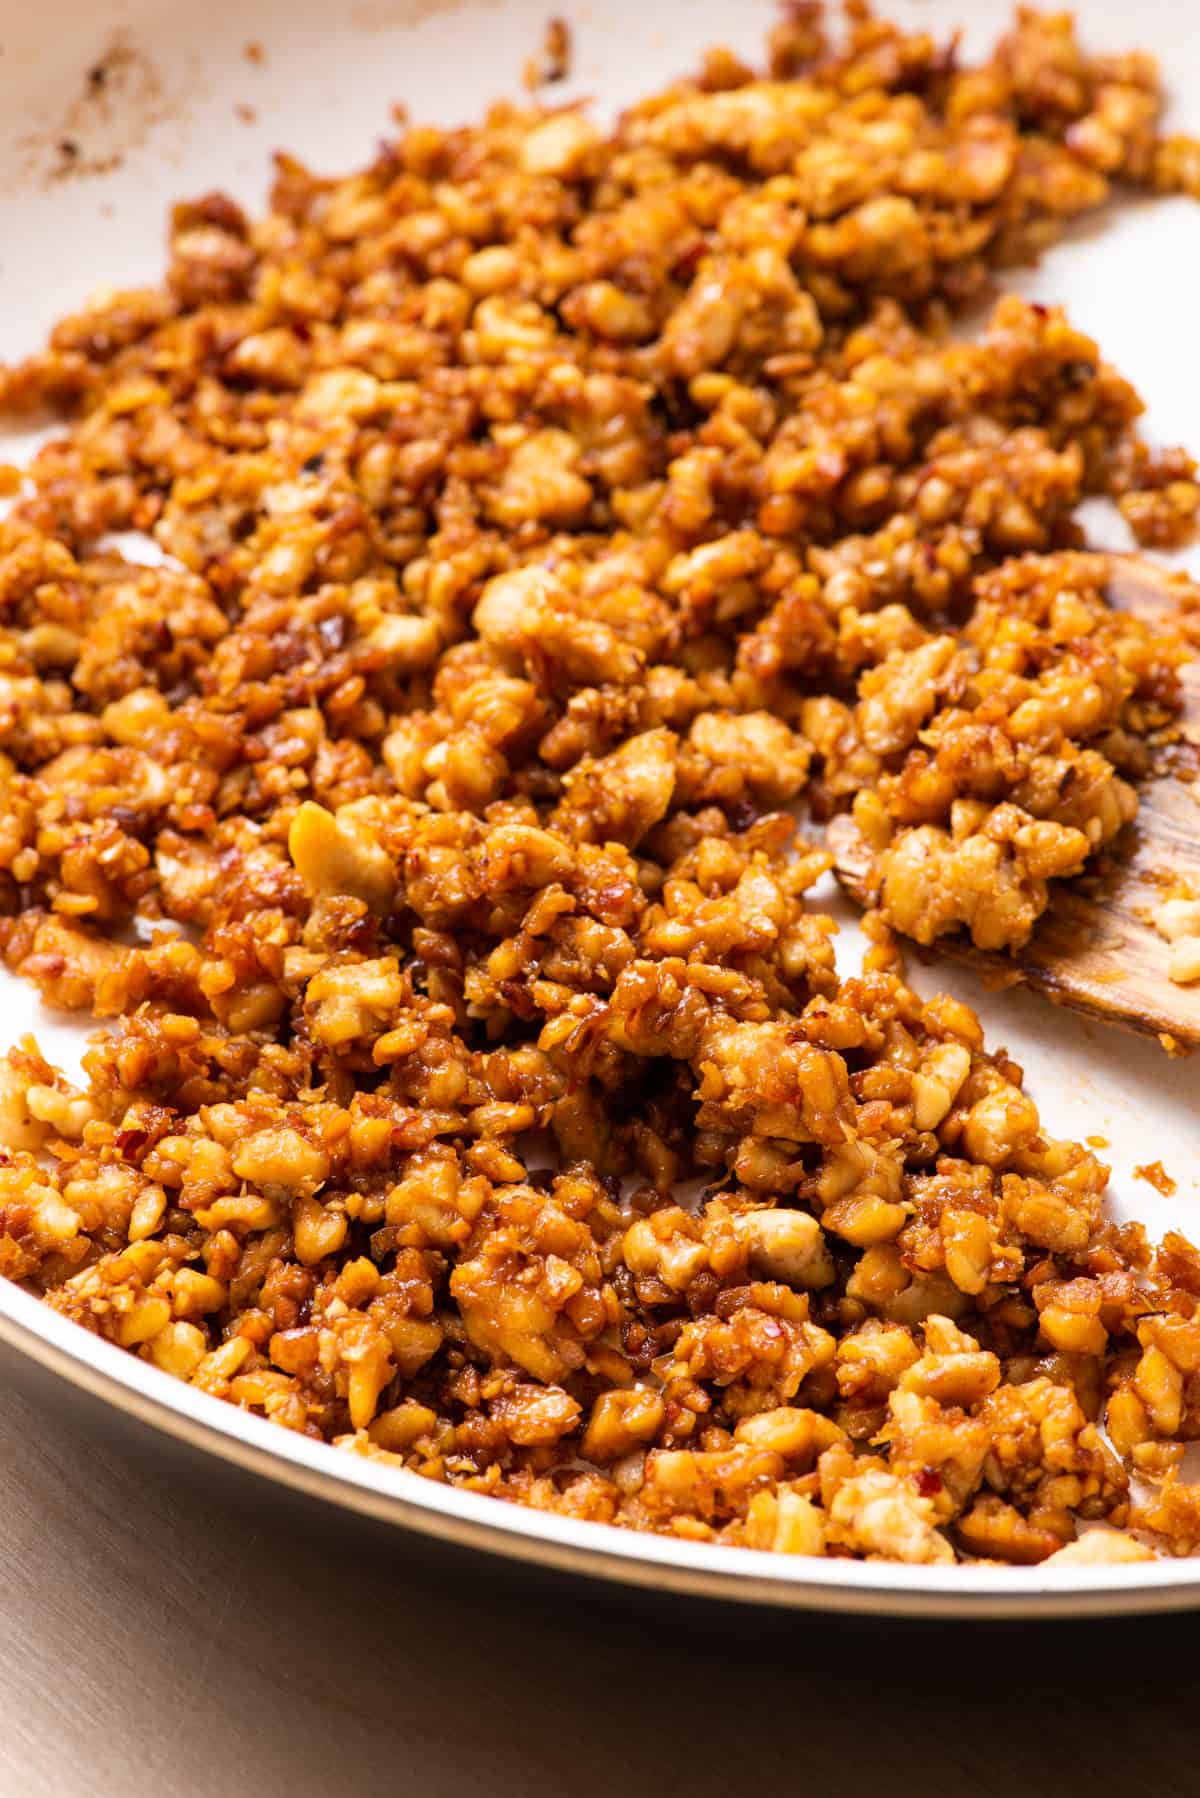 Glazed tempeh crumbles in a skillet.